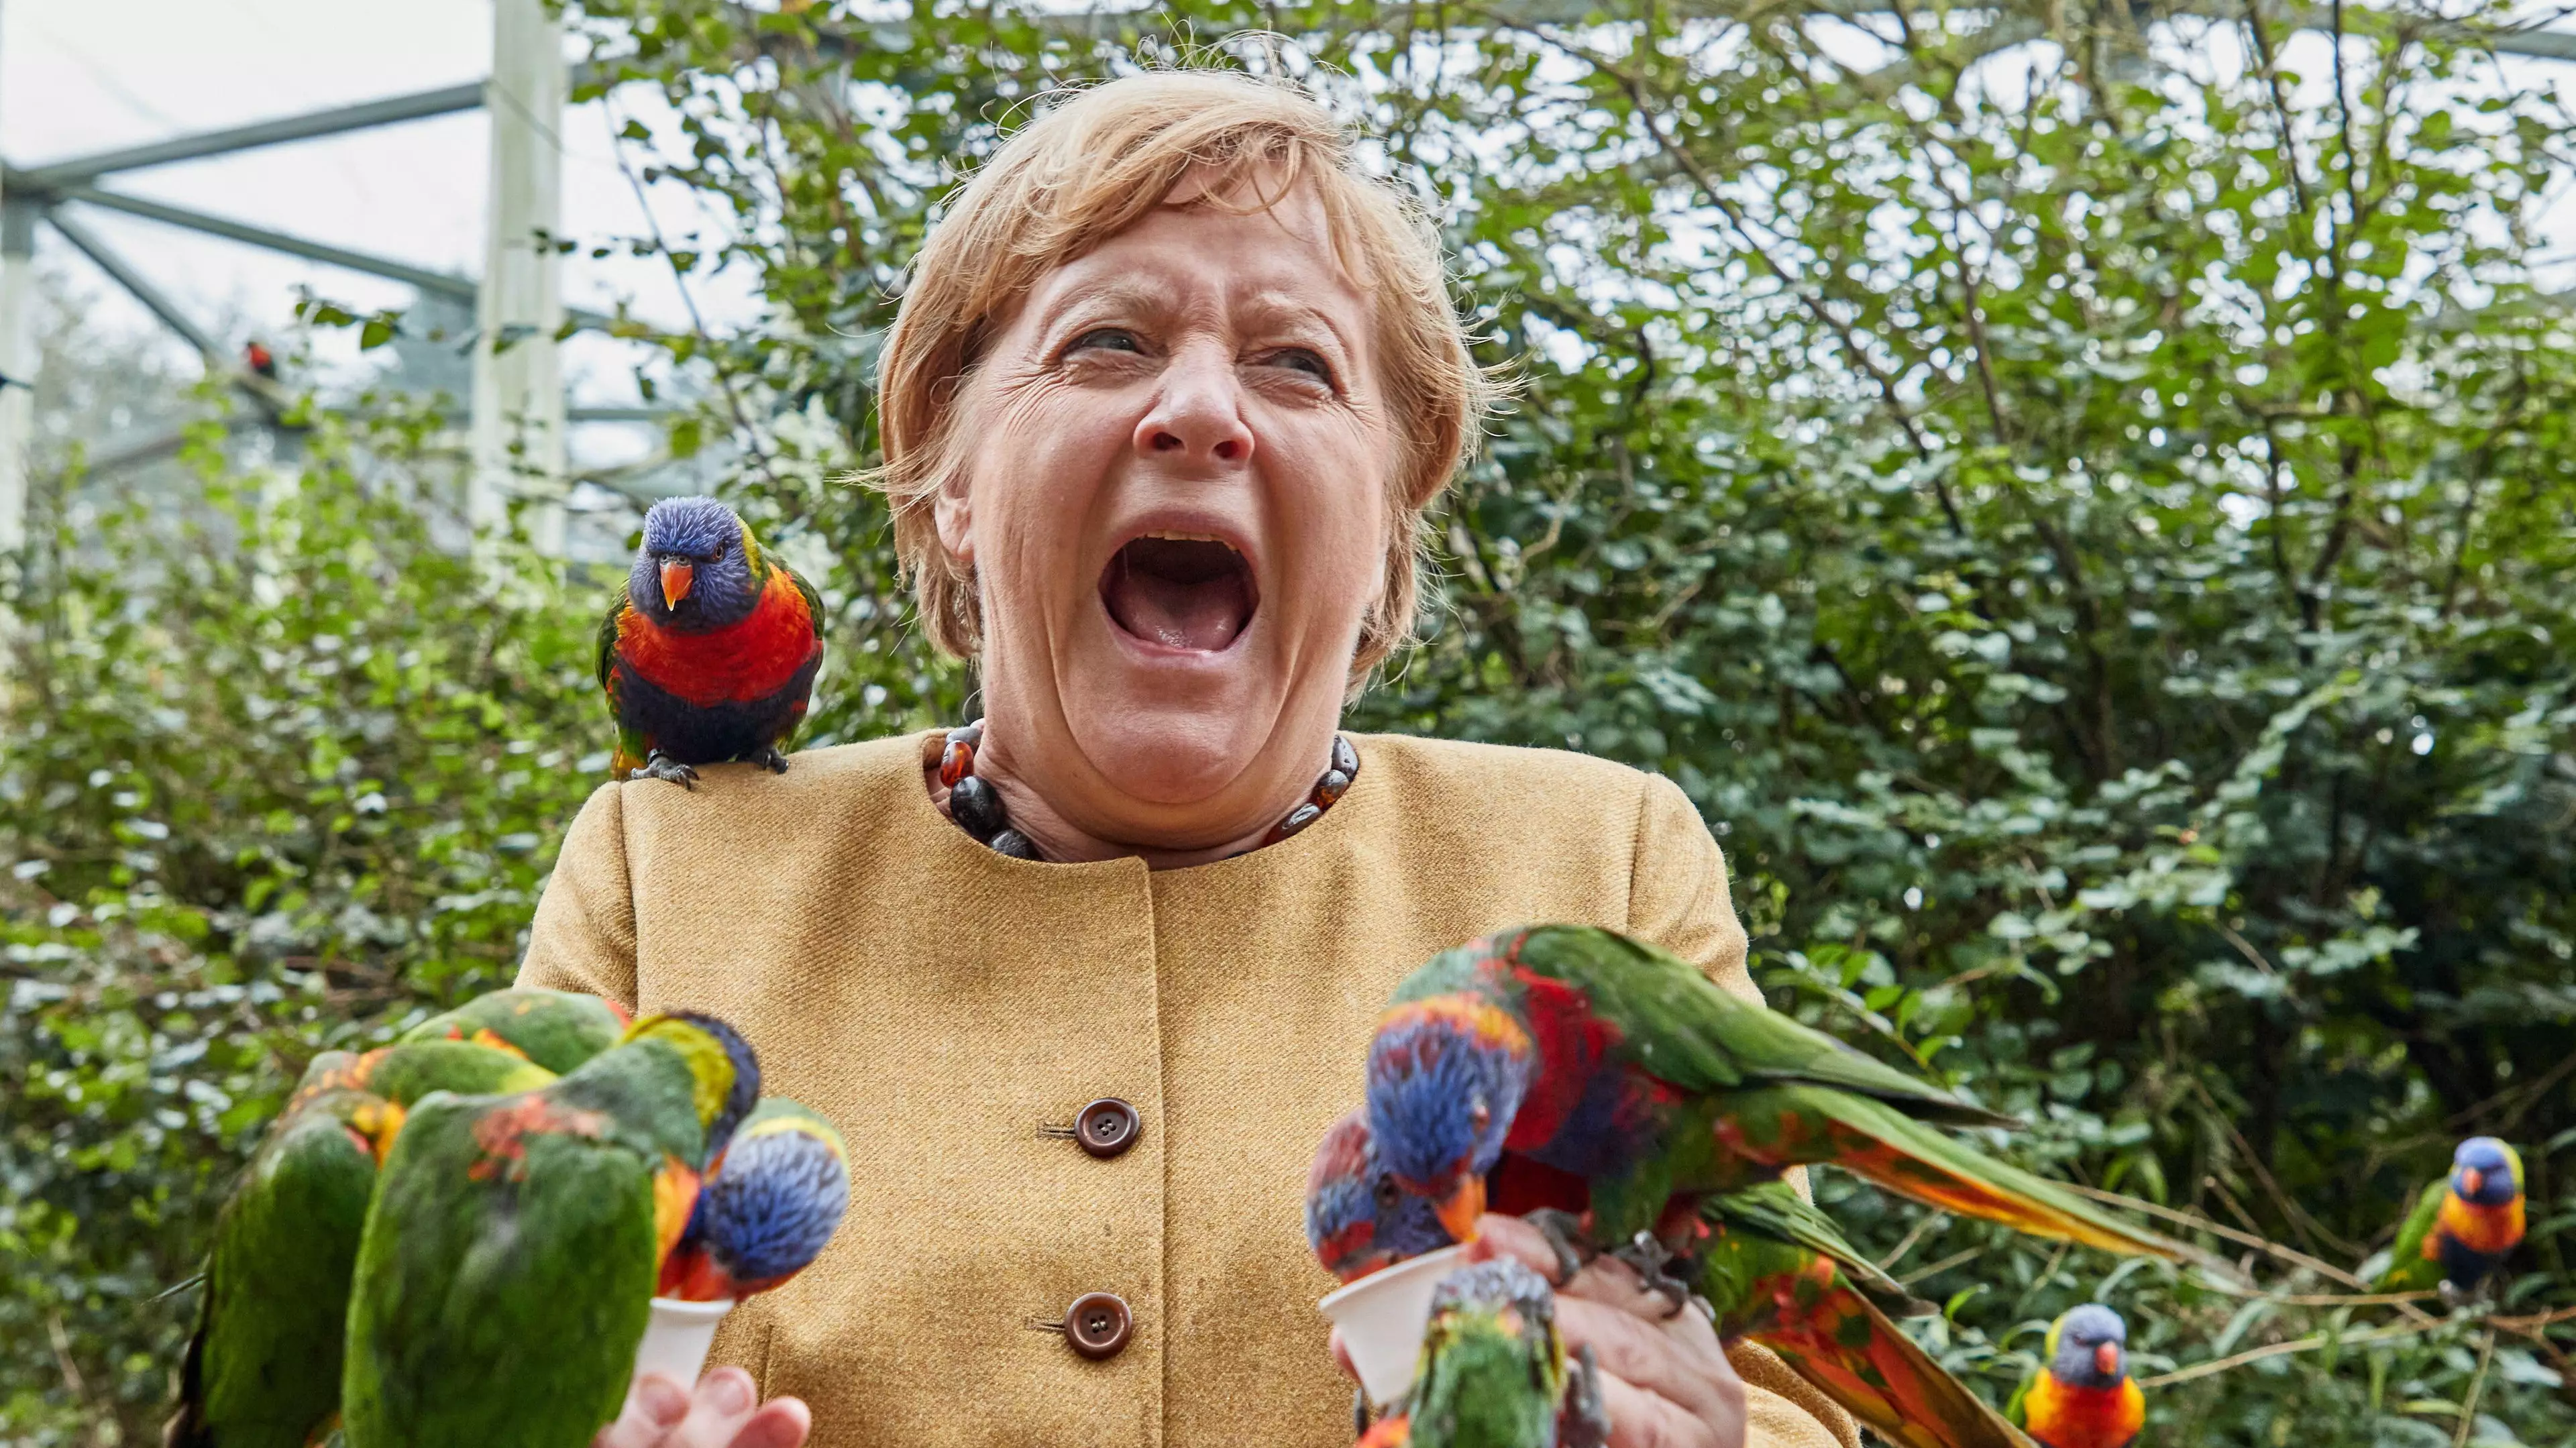 German Chancellor Angela Merkel Did Not Have A Fun Time With Australian Lorikeets